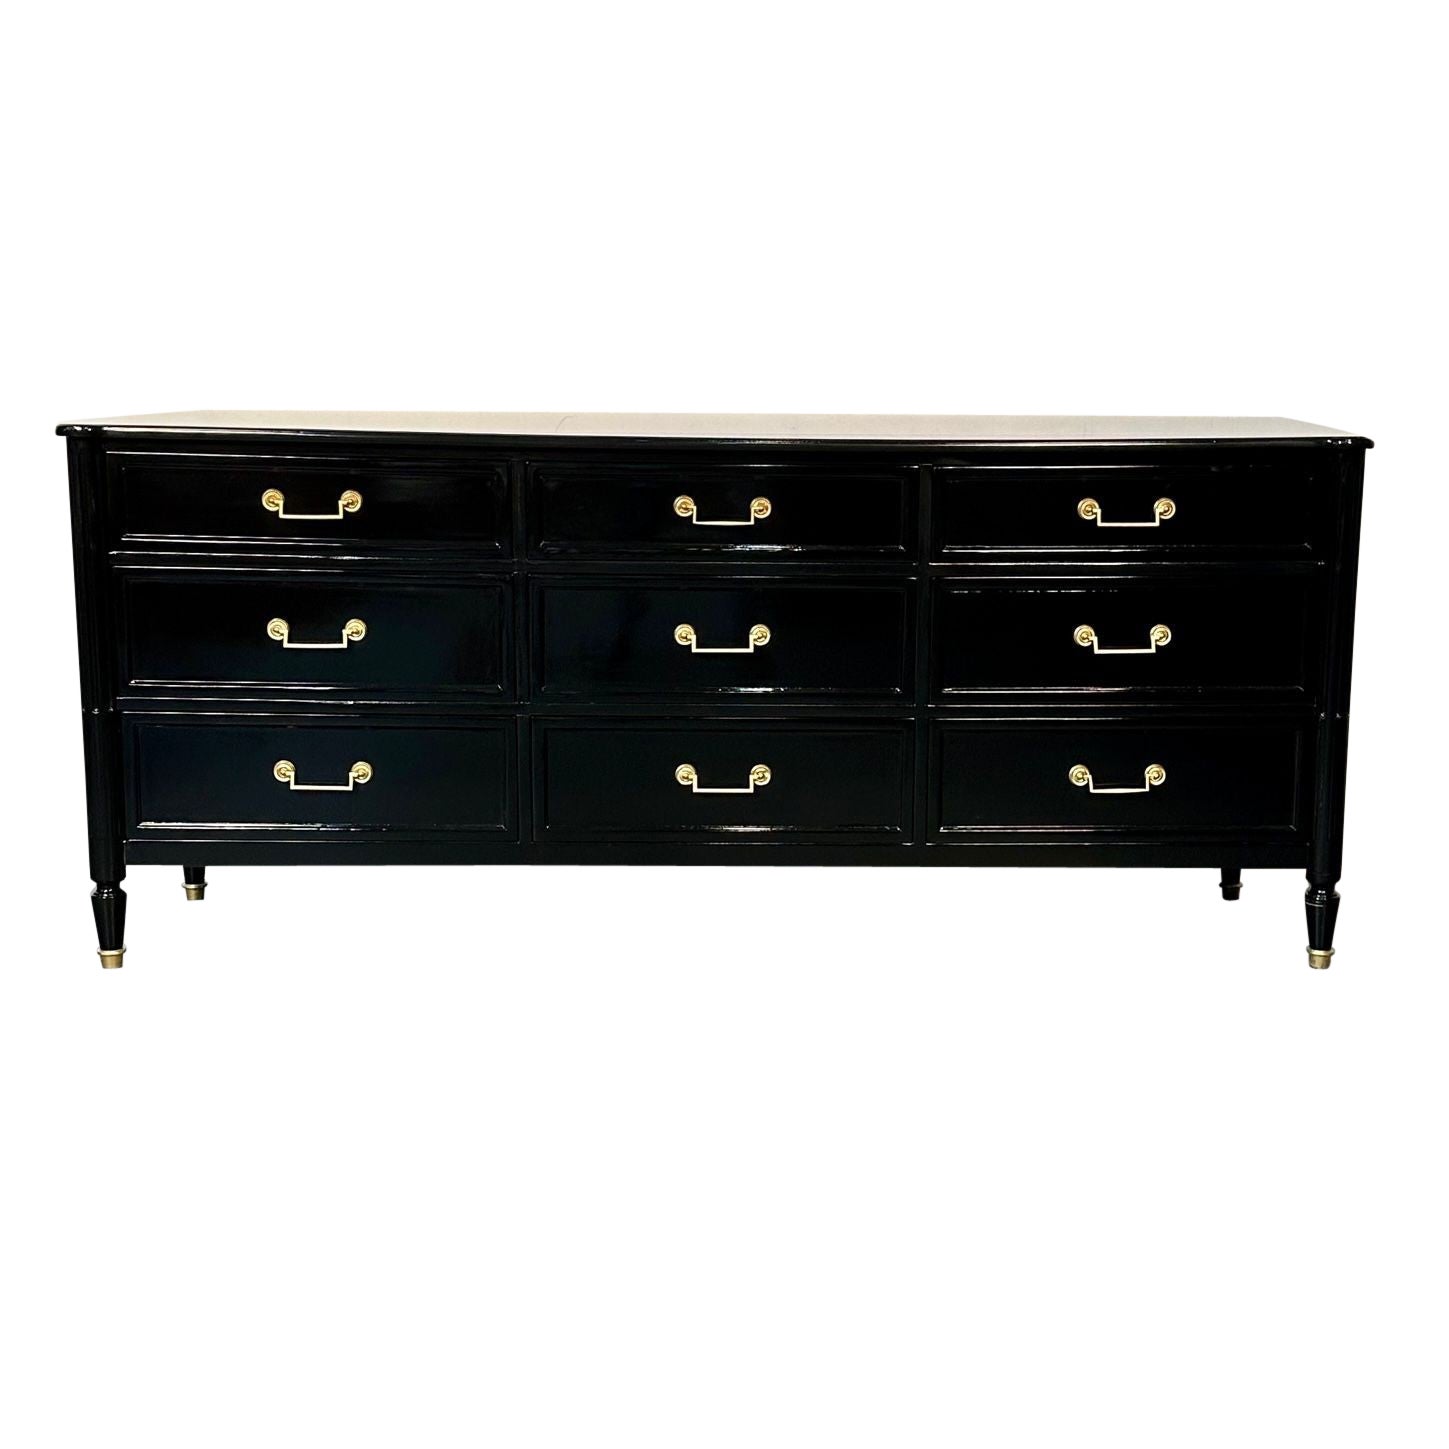 Hollywood Regency Louis XVI Style Ebony Lacquered Dresser / Chest of Drawers For Sale